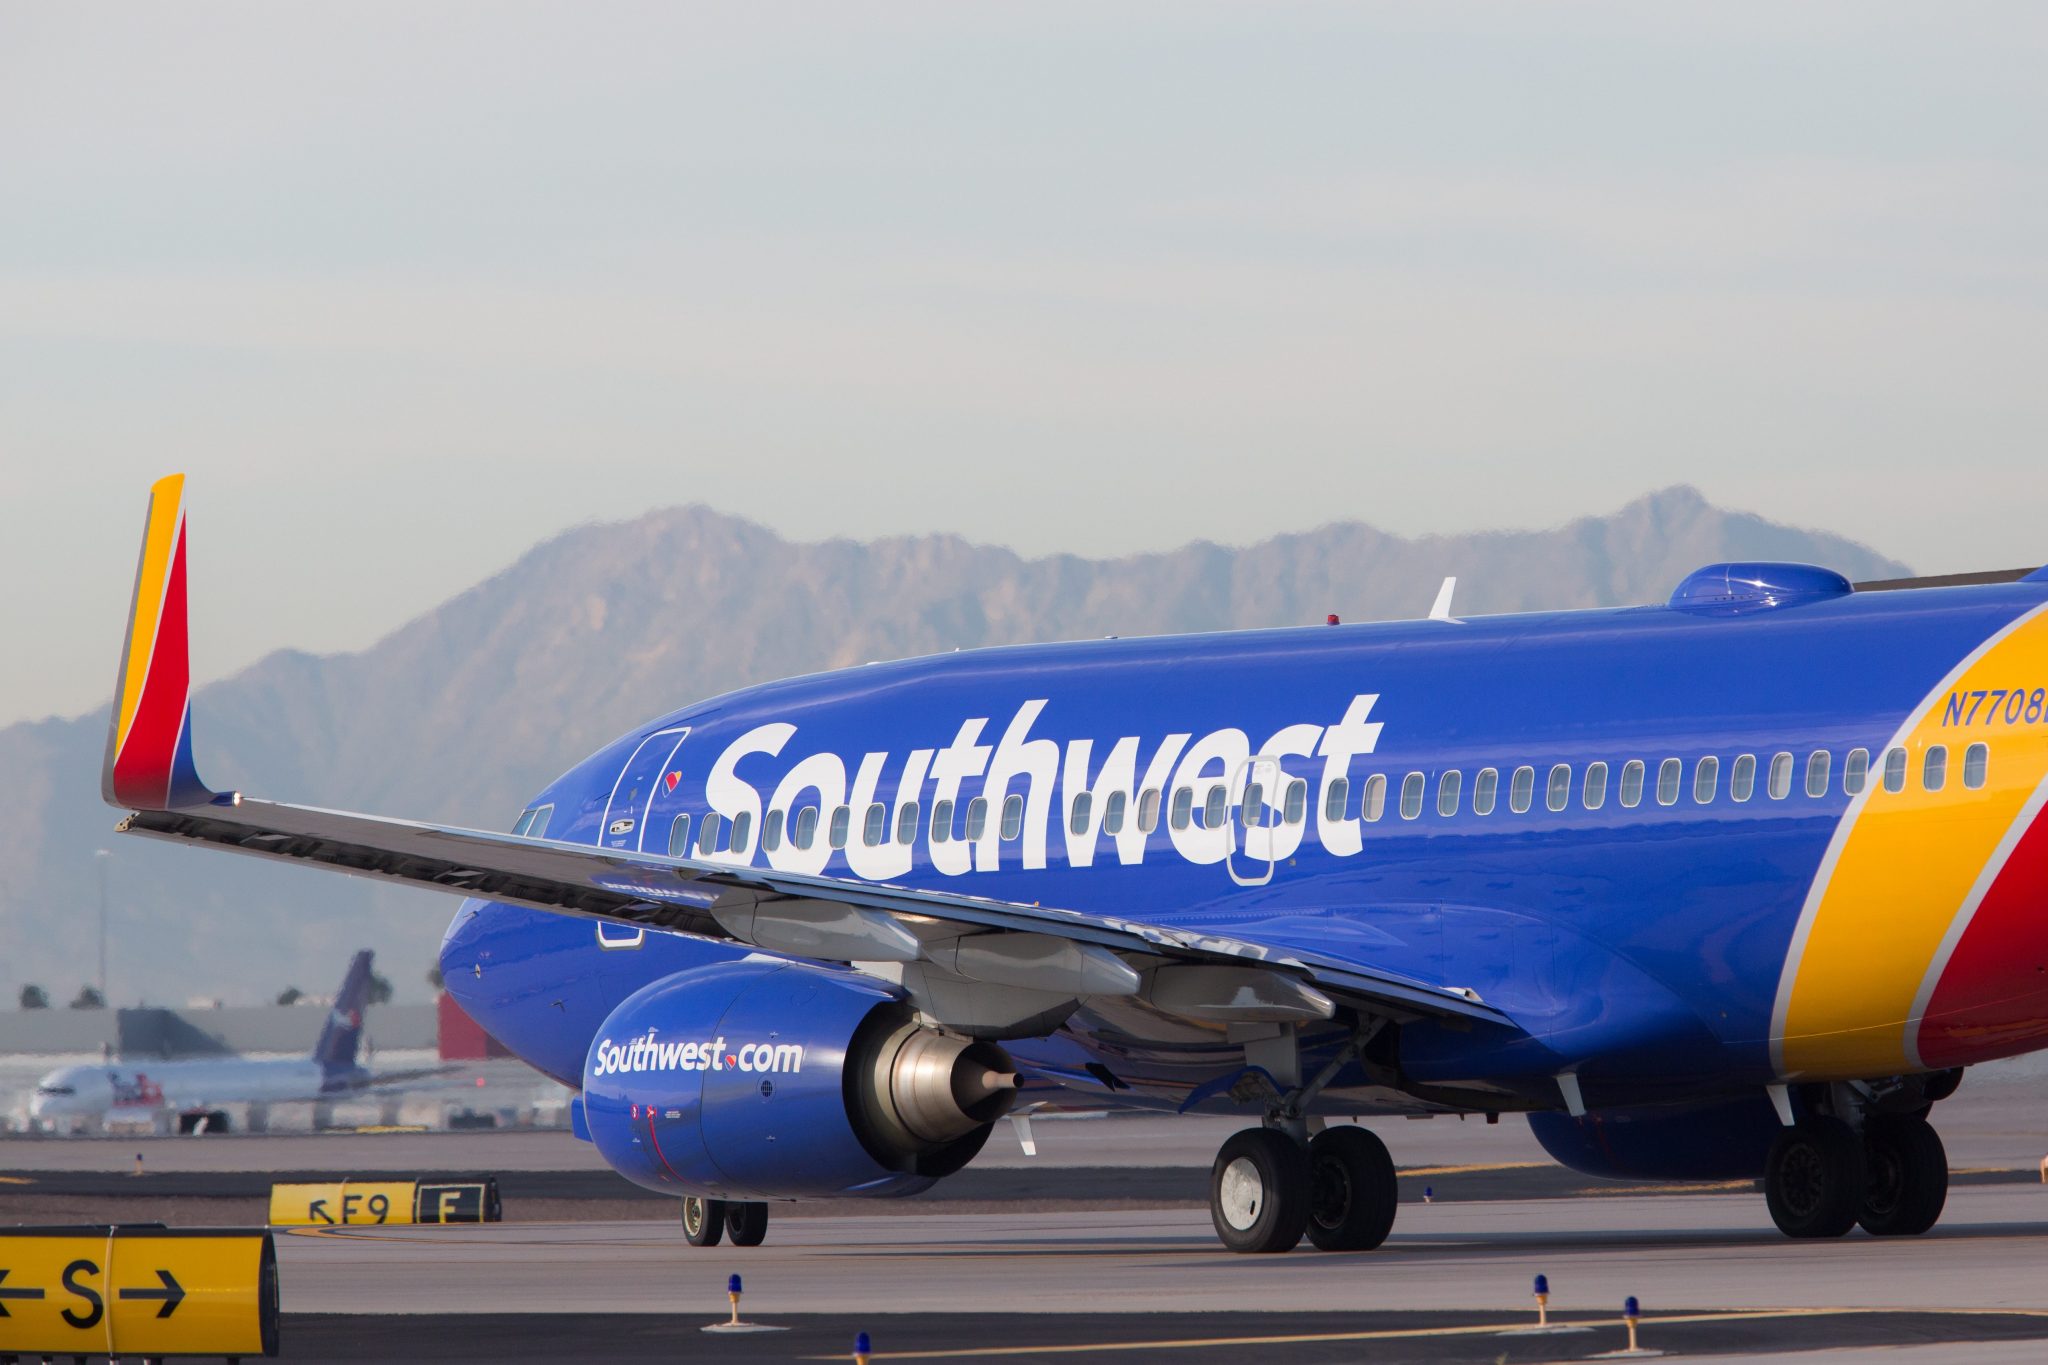 Flight Attendant Sues Southwest Airlines for Covering Up for Pilots Accused Who Live-Streamed Onboard Lavatory